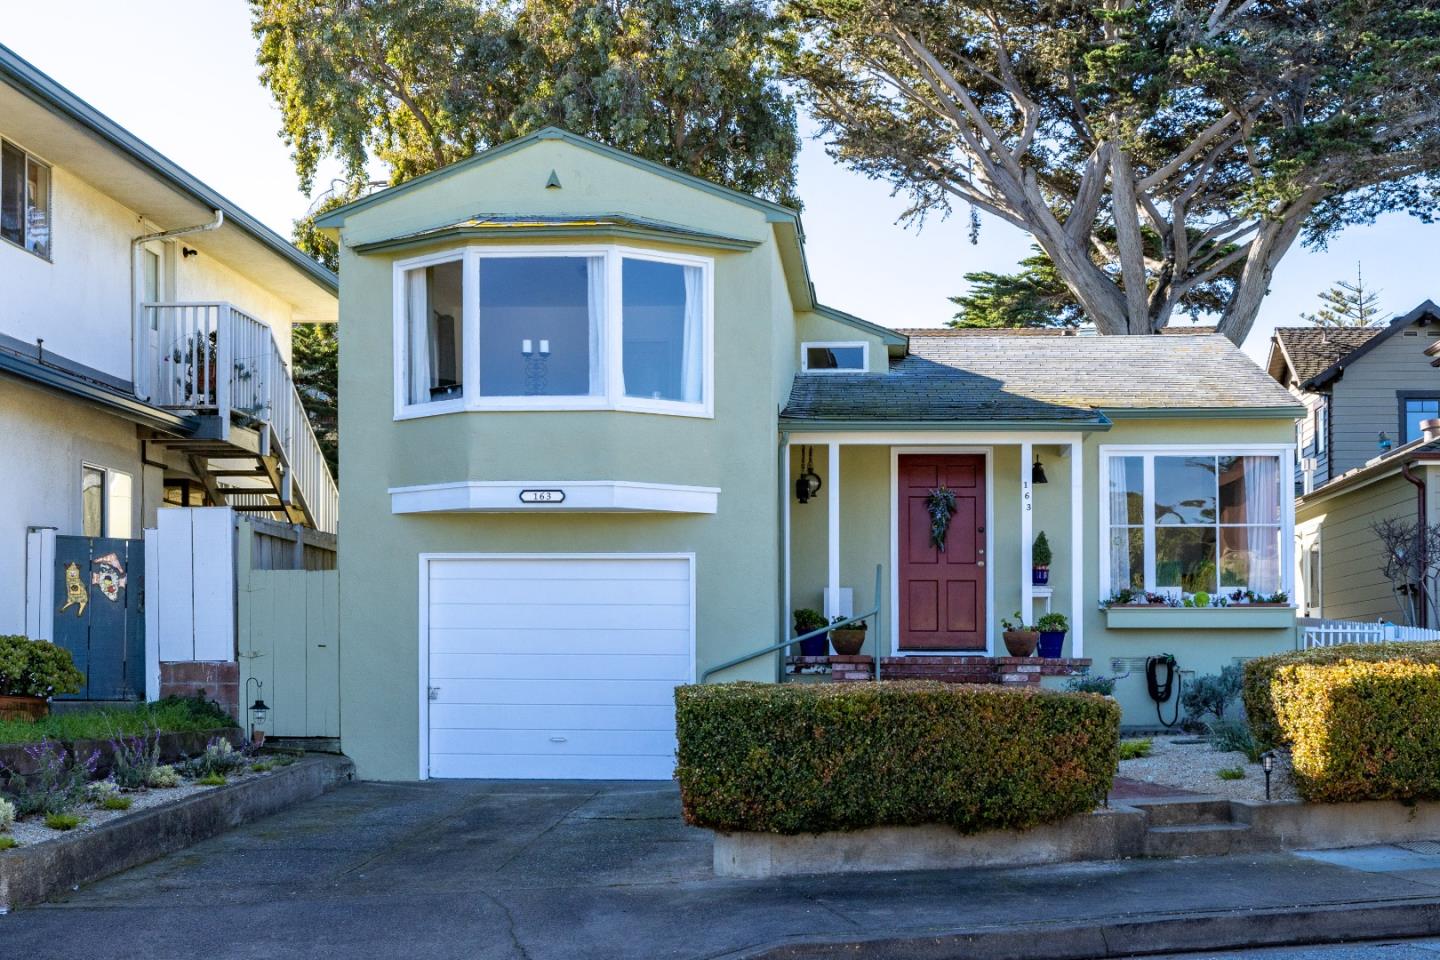 163 Sloat AVE, PACIFIC GROVE, CA 93950